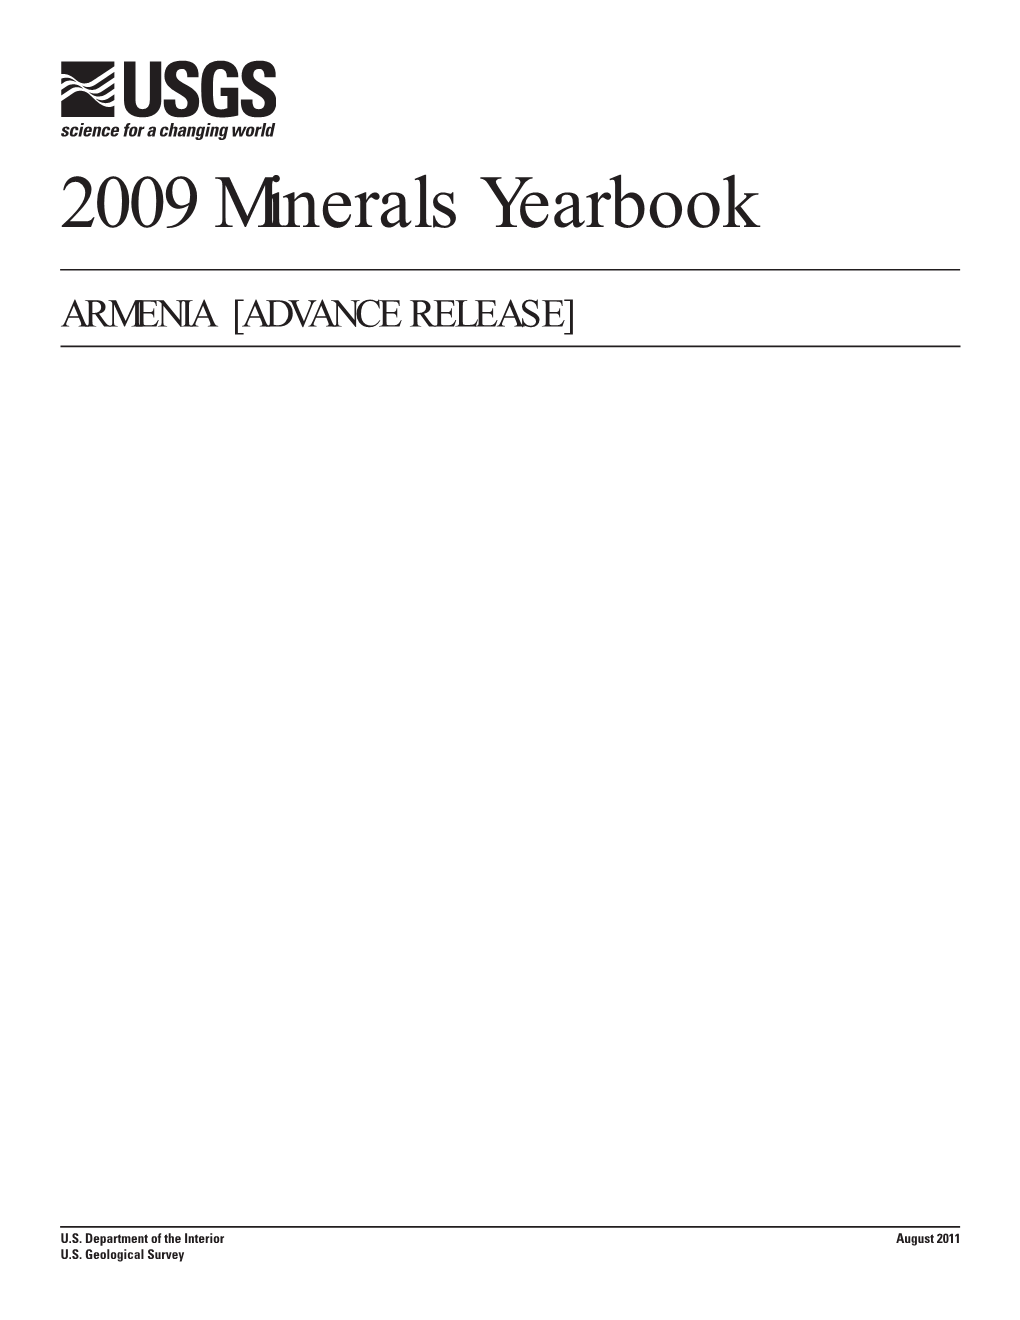 The Mineral Industry of Armenia in 2009